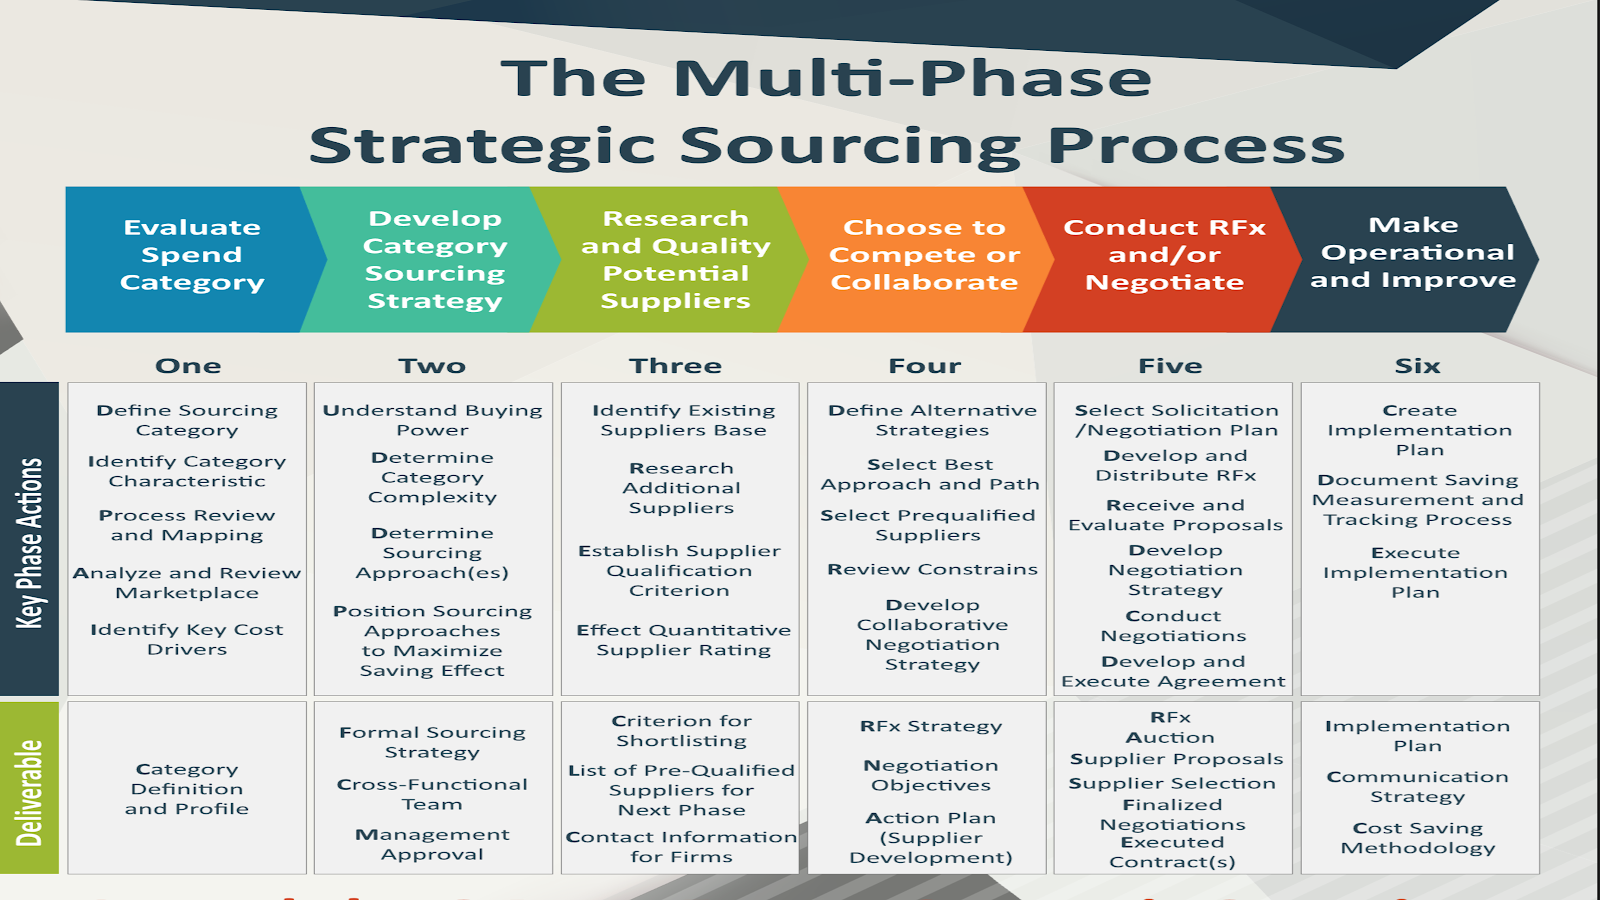 Free Strategic Sourcing BluePrint Map Summarizes in 1 Page the Full Sourcing Process